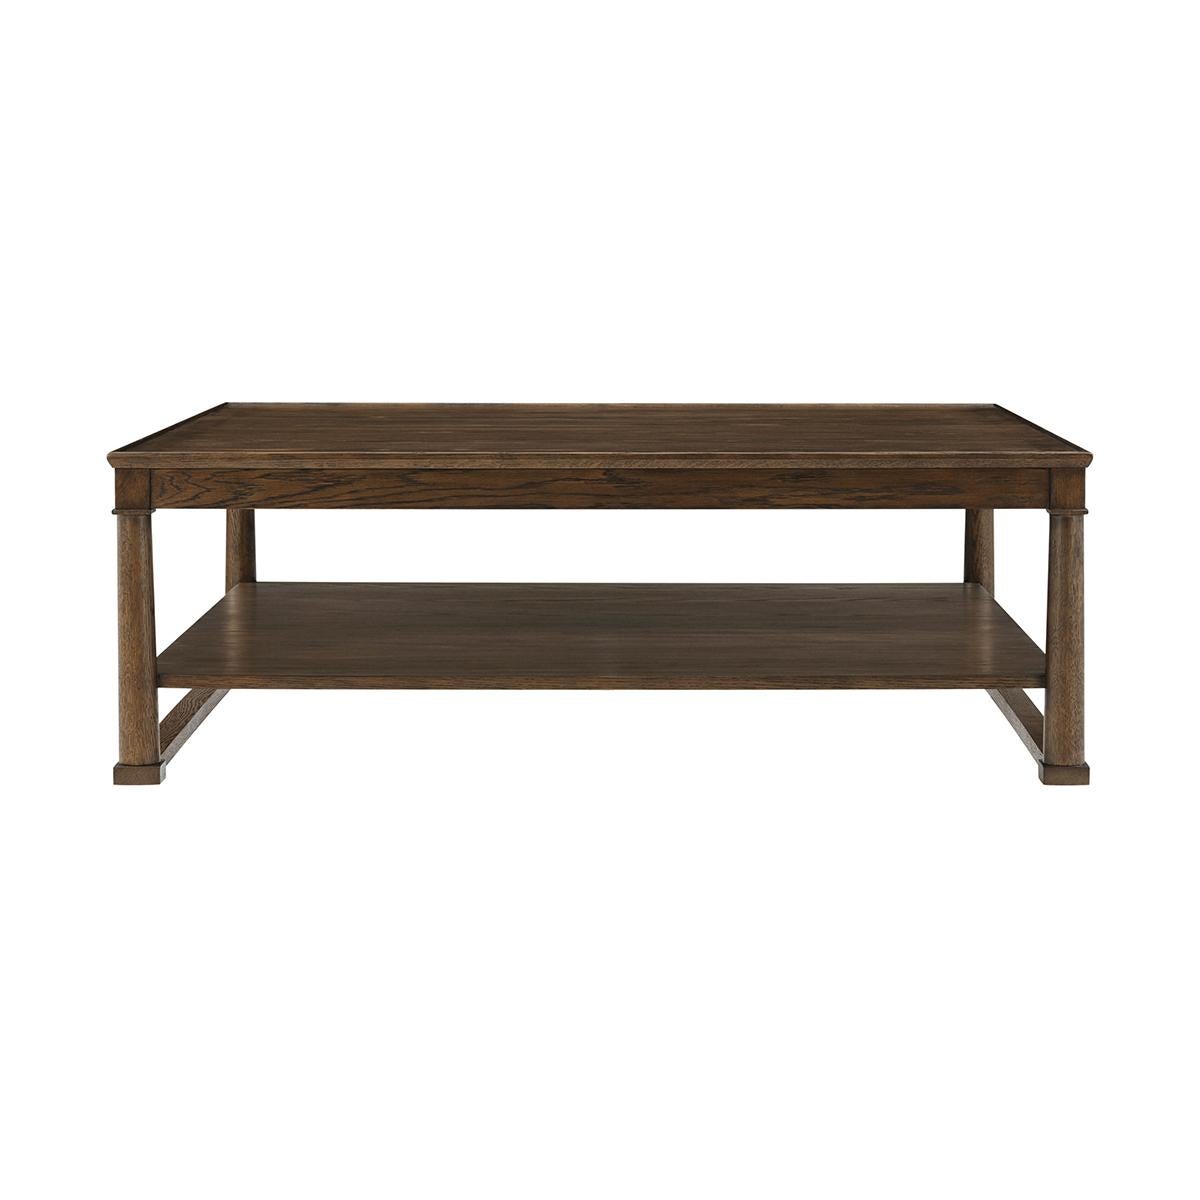 This elegantly designed piece combines functionality with style, making it the perfect centerpiece for any living room. Crafted from high-quality oak, the table boasts a rich, warm Brownstone finish that highlights the natural grain and texture of